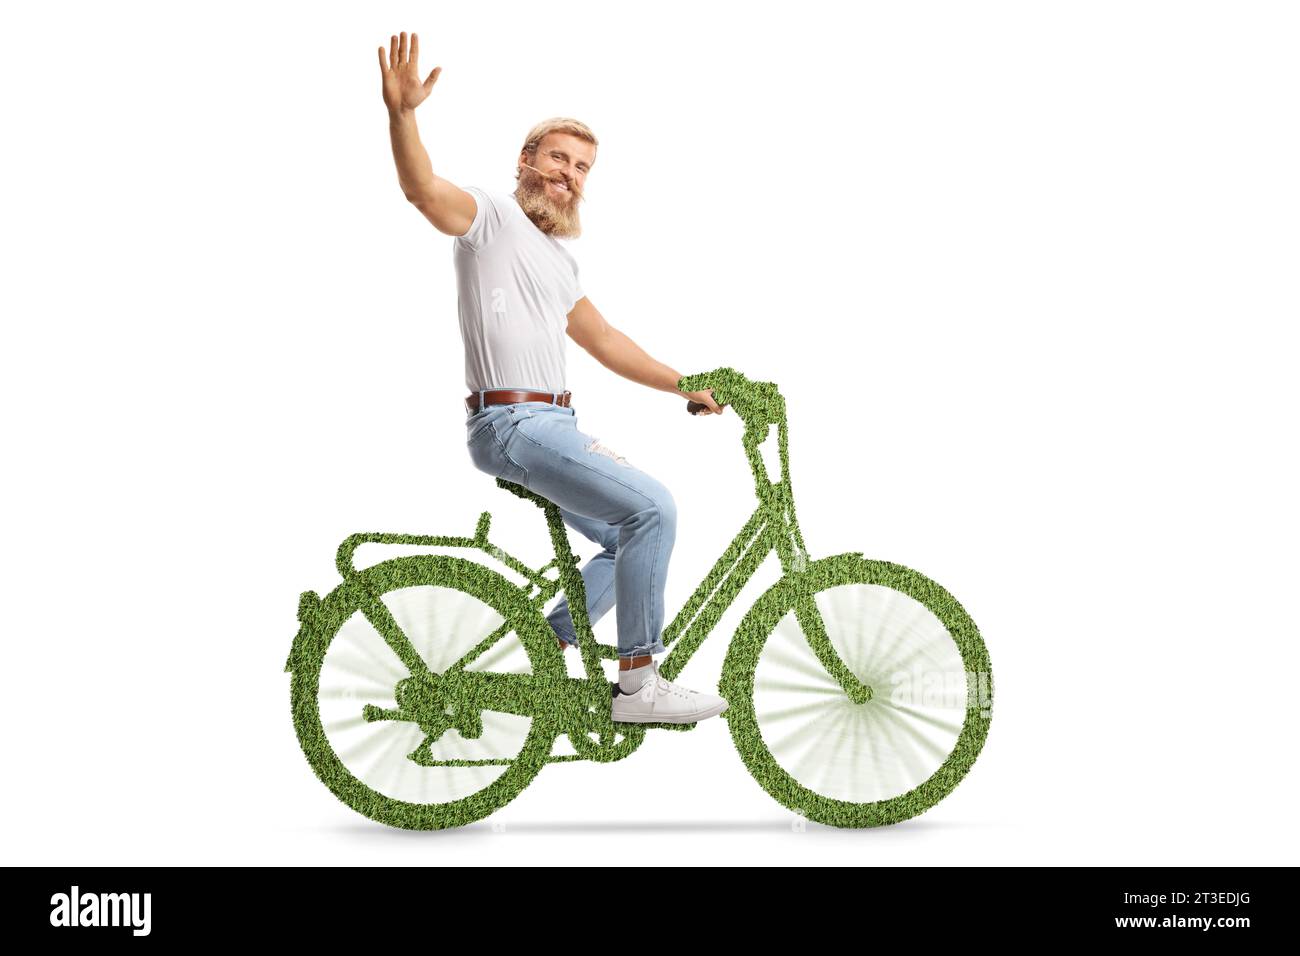 Guy riding a green bicycle and waving at camera isolated on white background Stock Photo